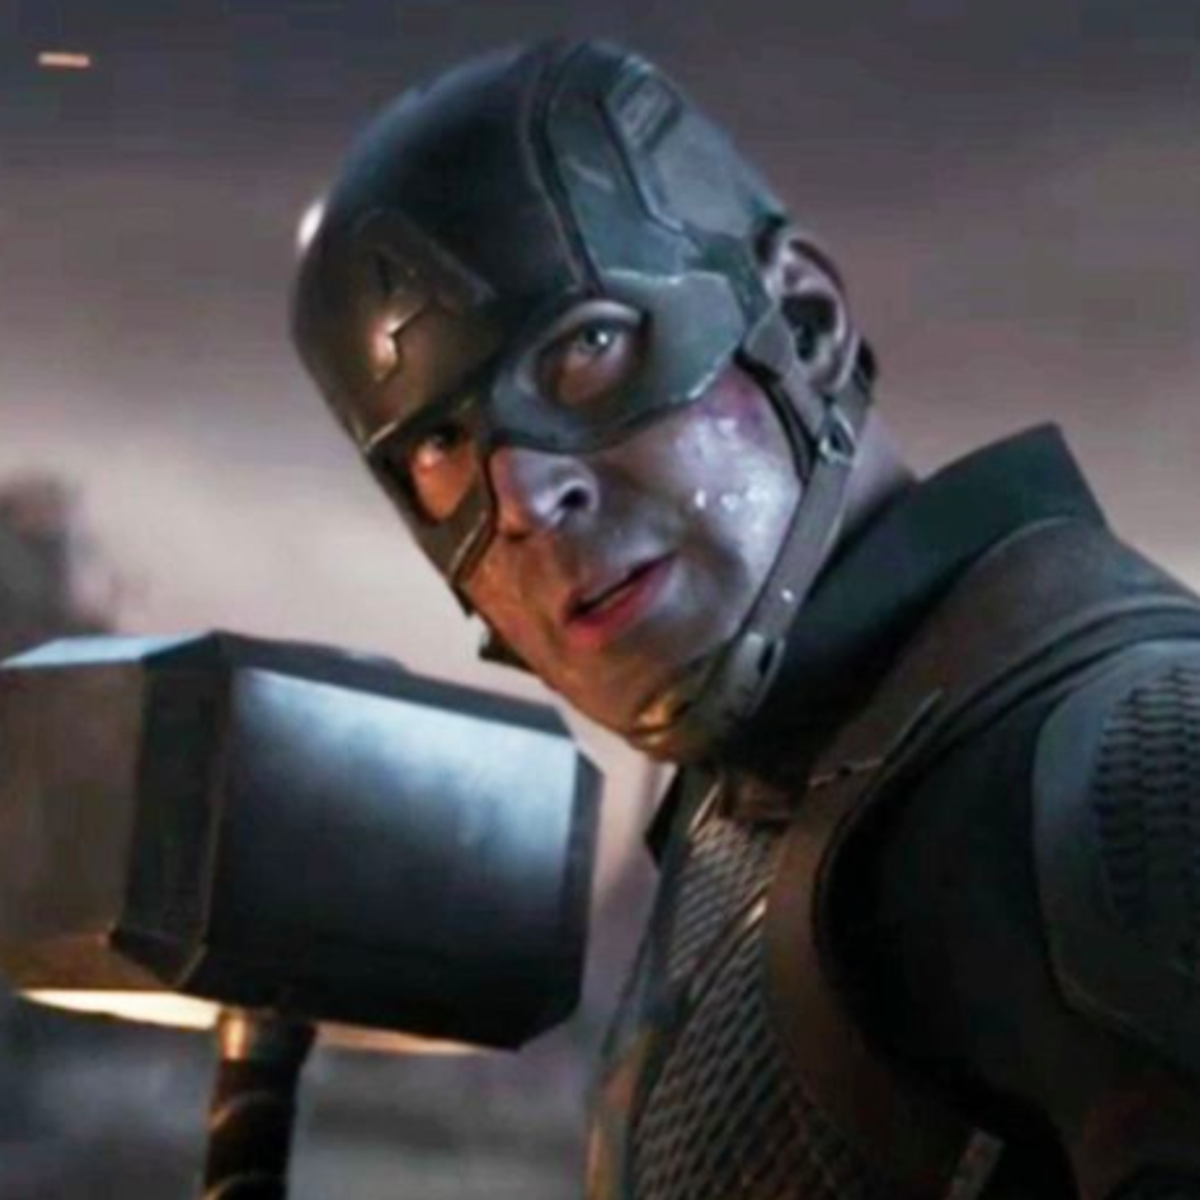 Avengers writer reveals Captain didn't lift Thor's hammer until Endgame | The Independent | The Independent